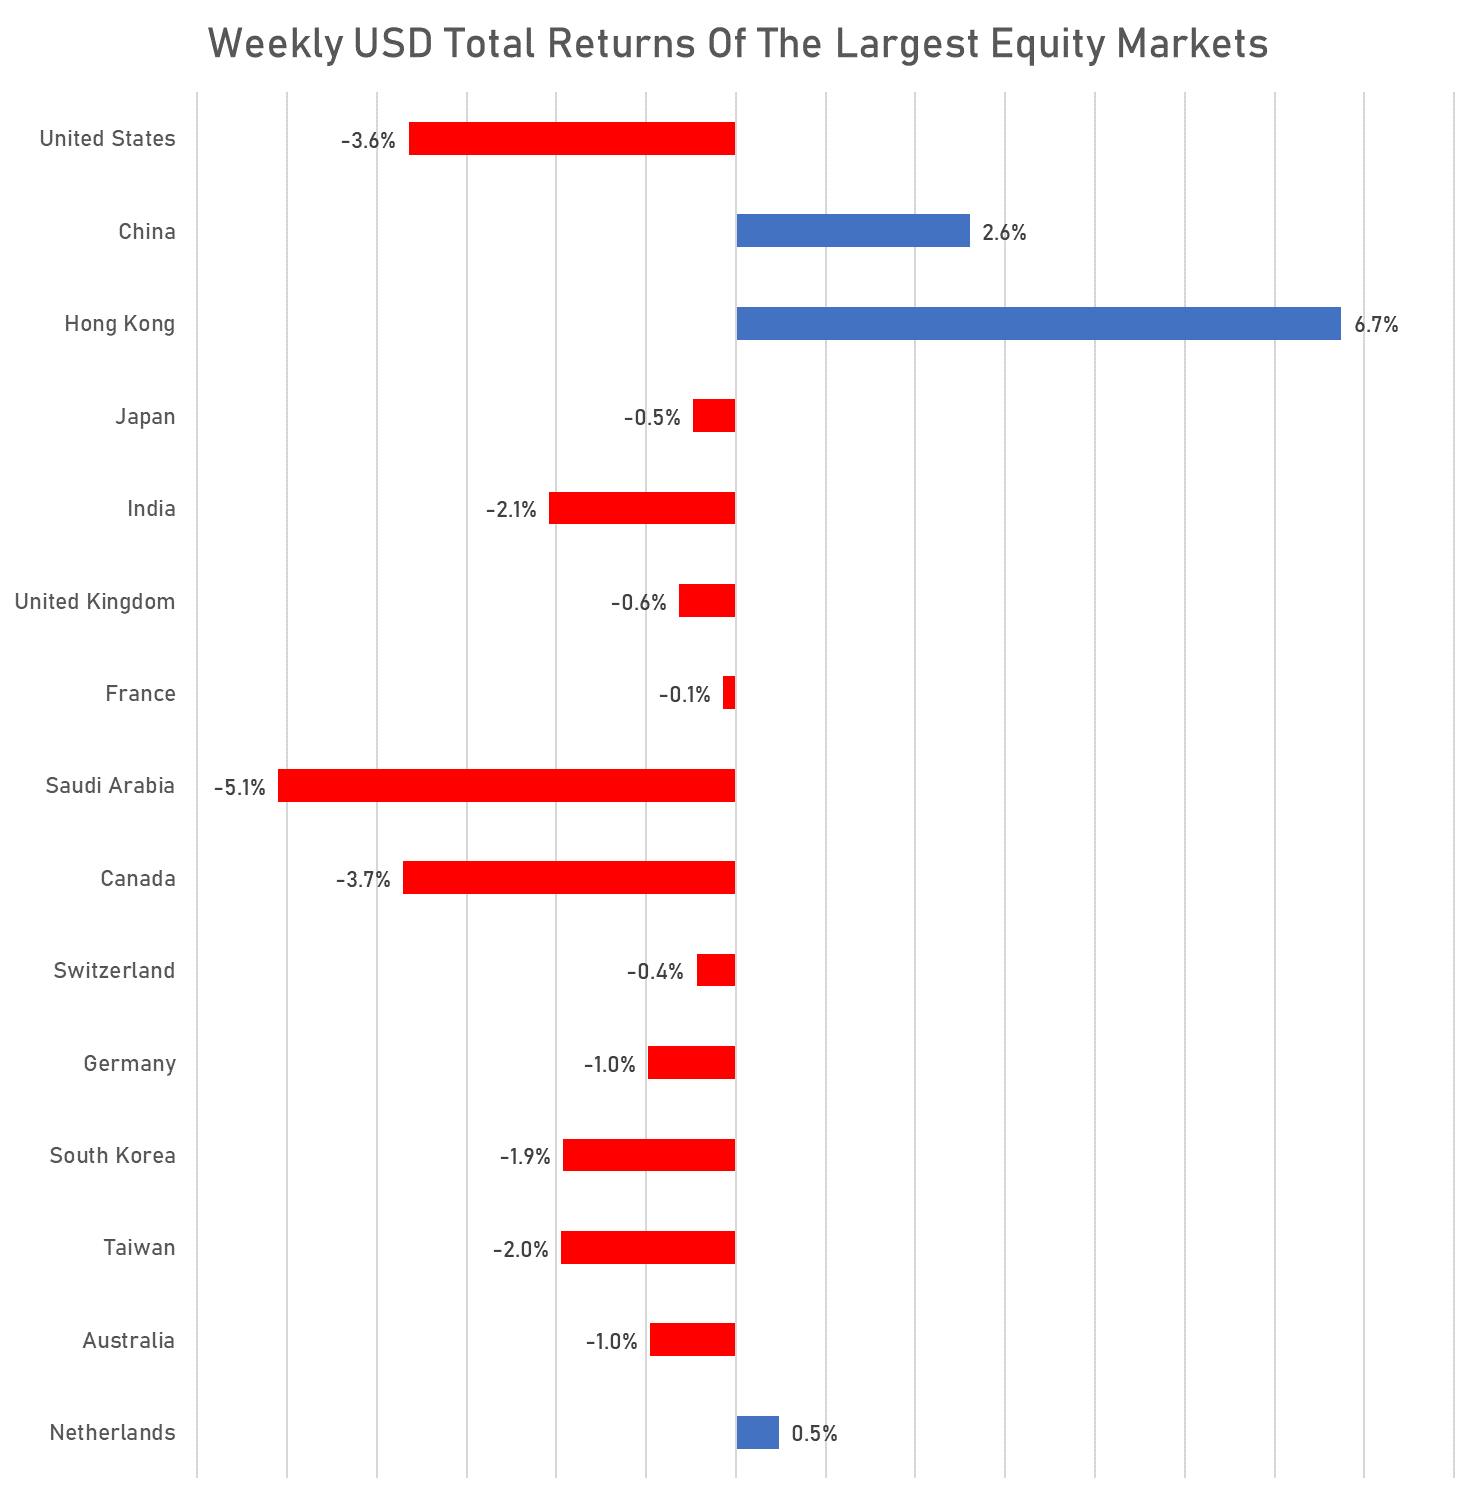 Weekly USD Total returns For Major Equity Markets | Sources: phipost.com, FactSet data